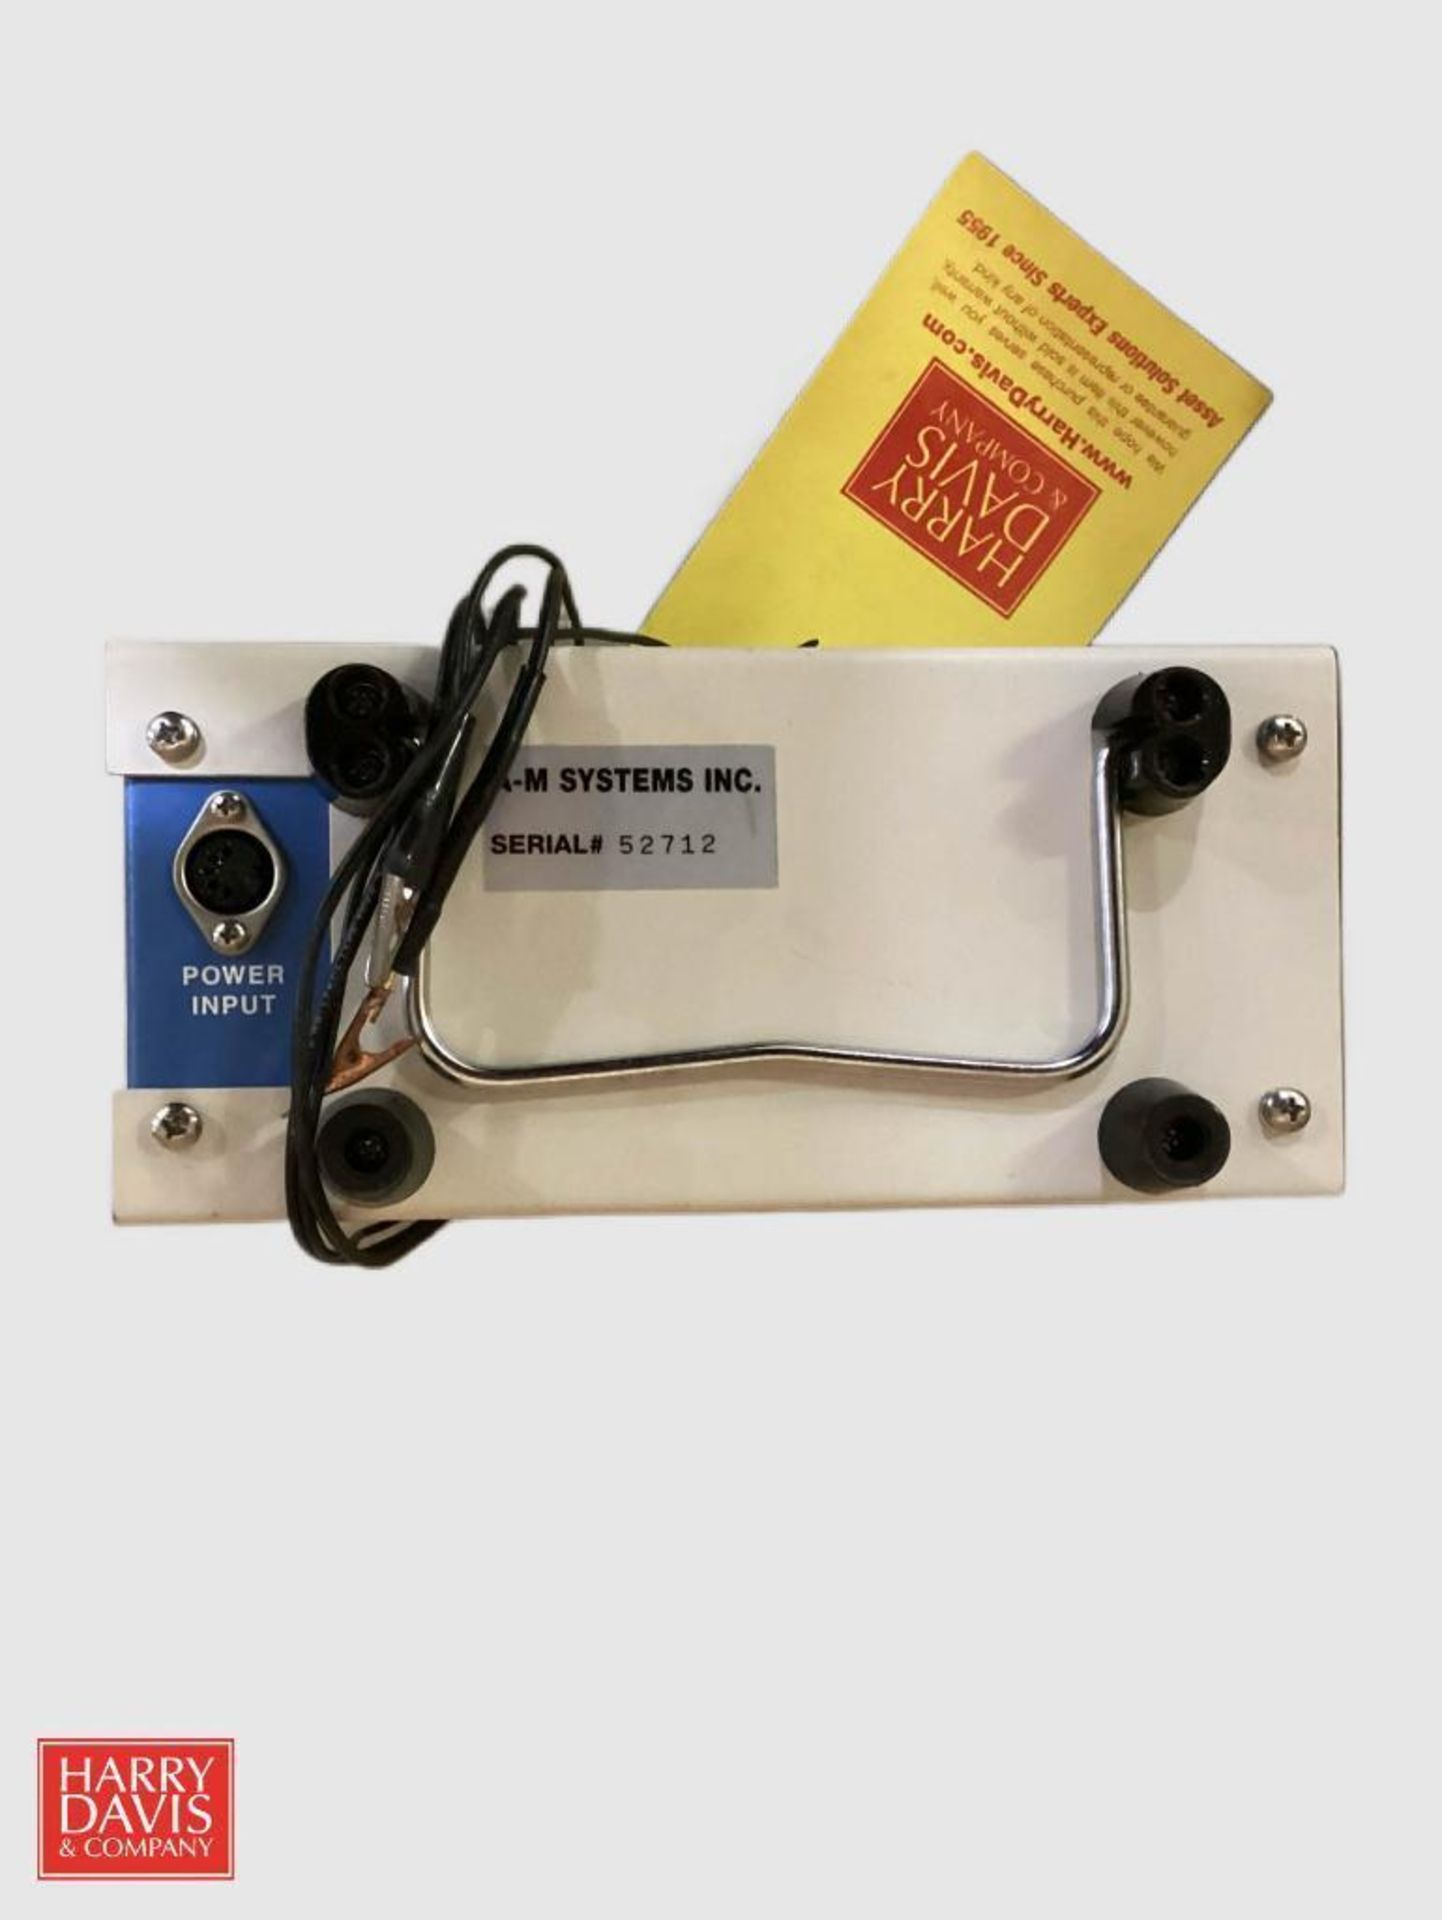 A-M Systems 2700 Glass Electrode Meter - Image 2 of 2